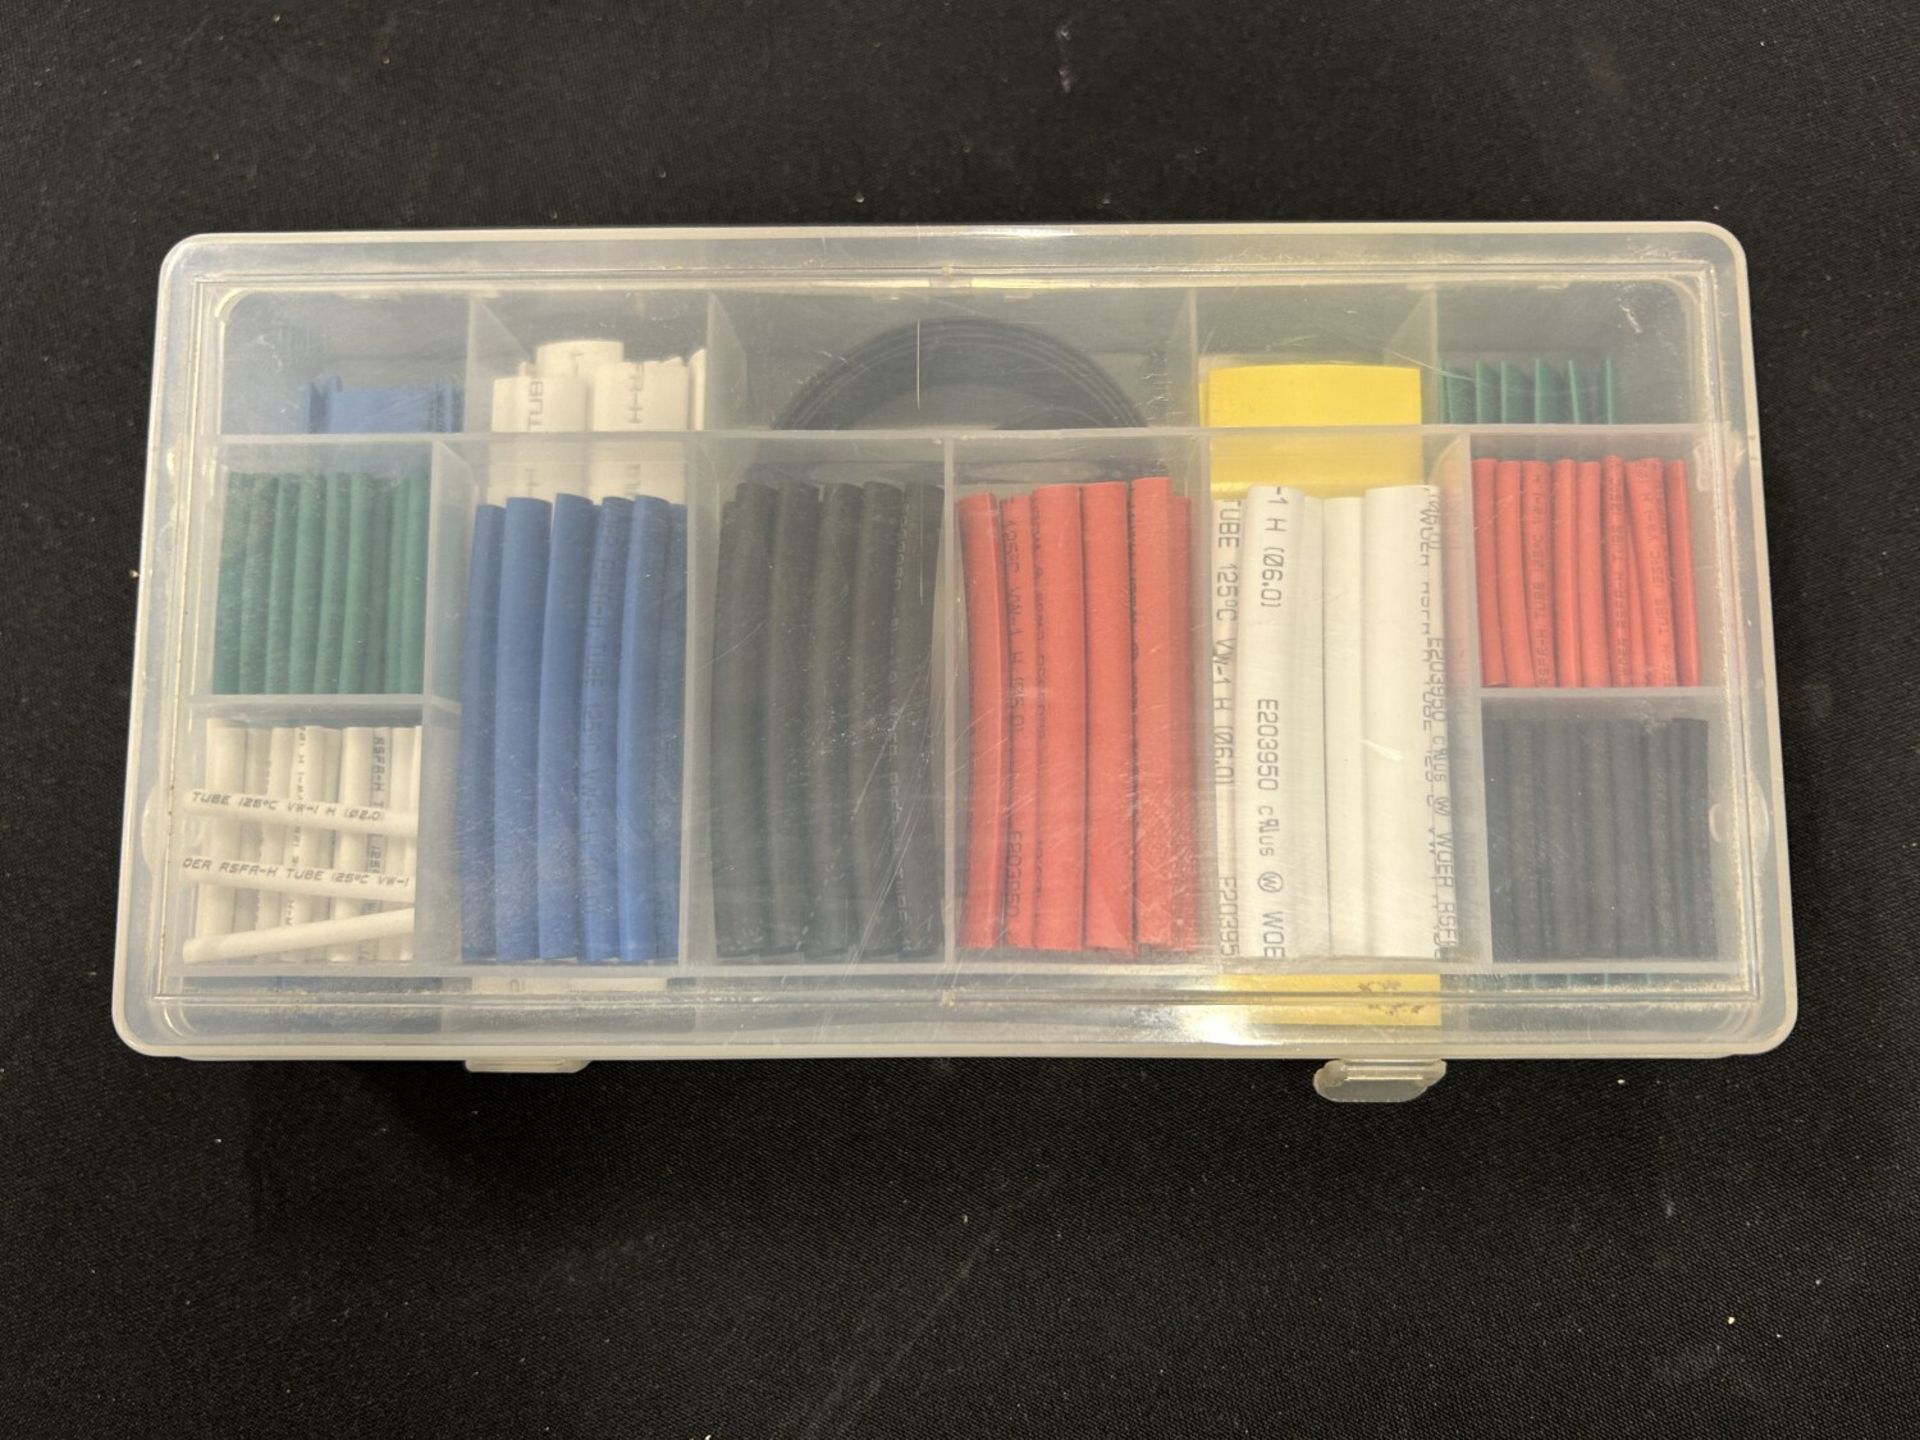 HARDWARE ASSORTMENT KIT, WIRE HEAT SHRINK WRAP, HARDWARE ASSORTMENT BINS AND CONTENTS - Image 4 of 4